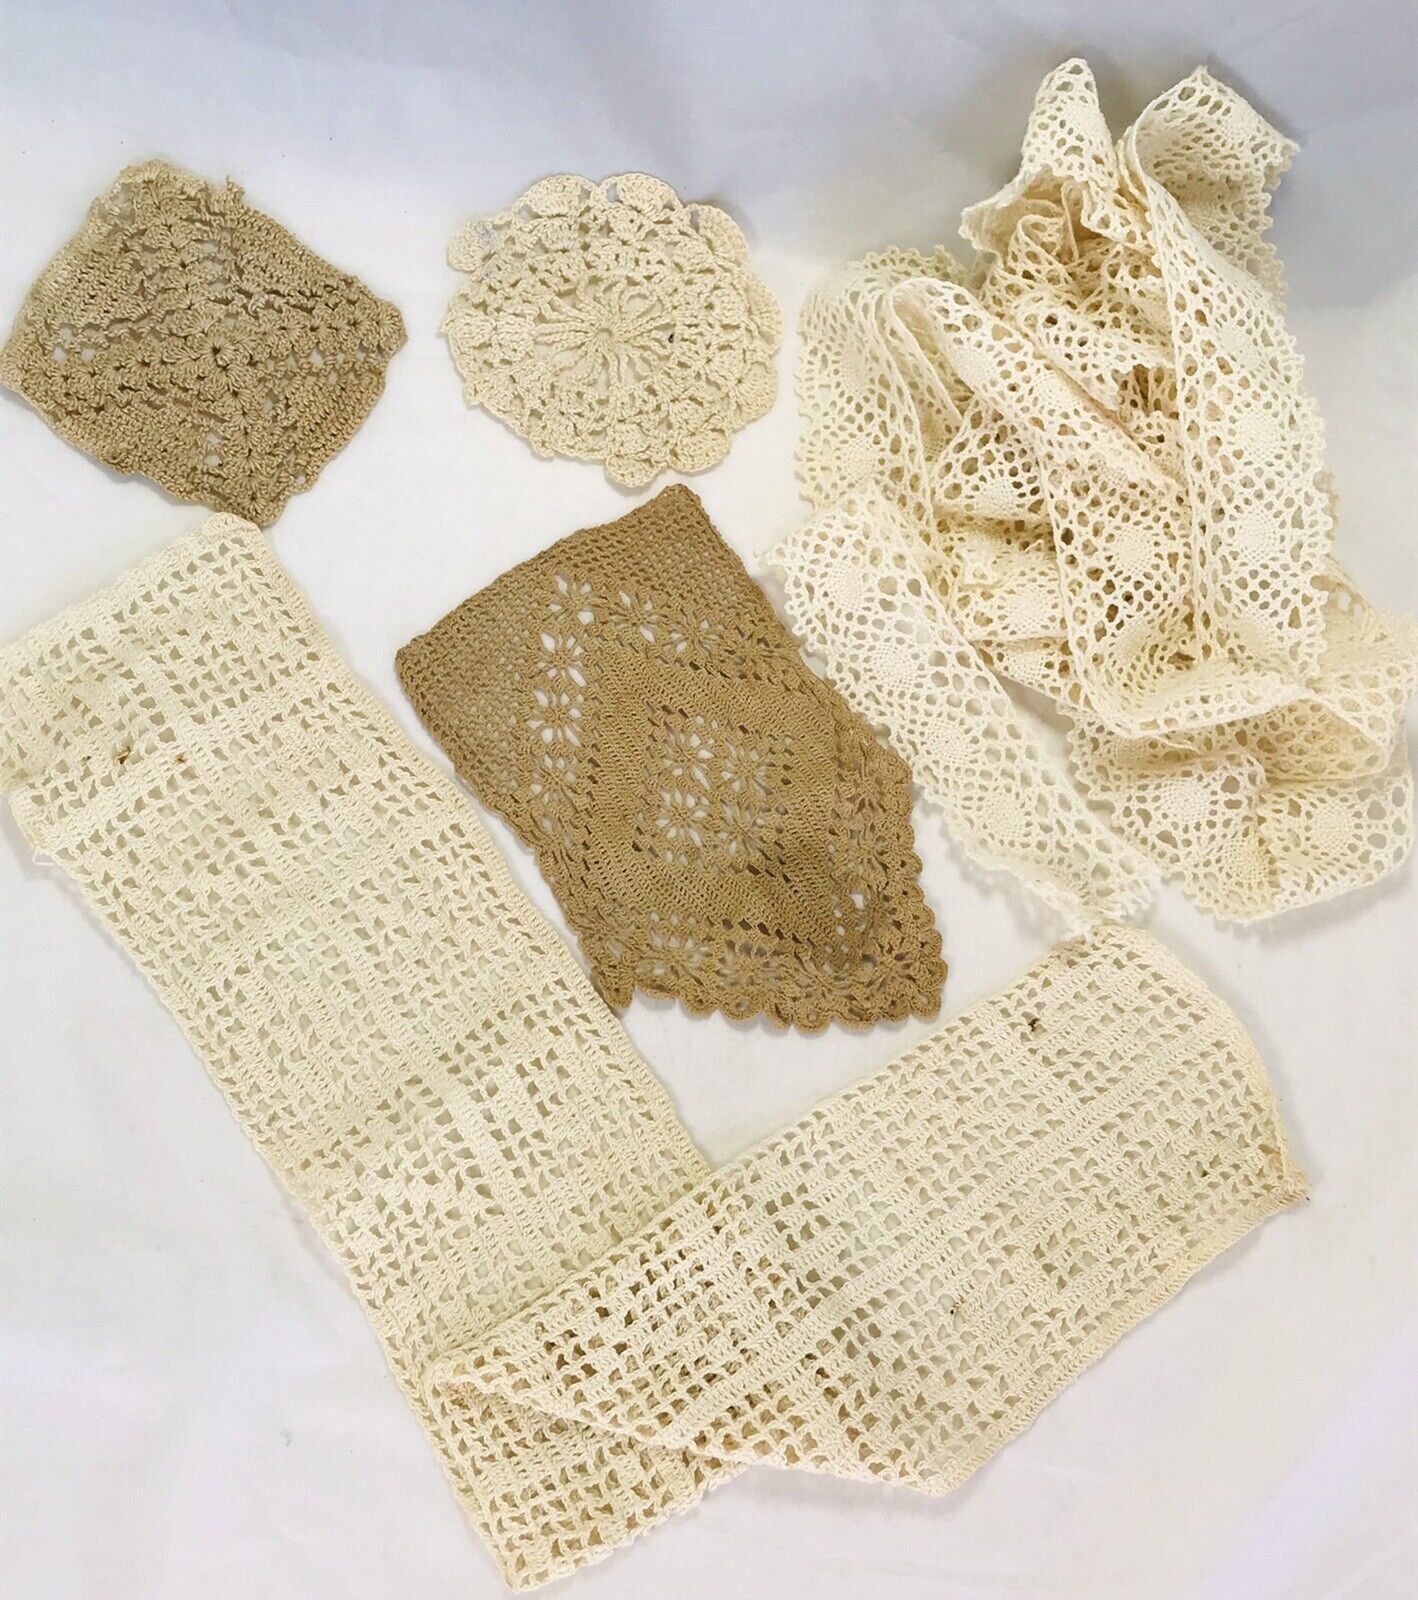 Lot Vintage Antique Crochet Work from crochet, Tatting Lace For Repurposing